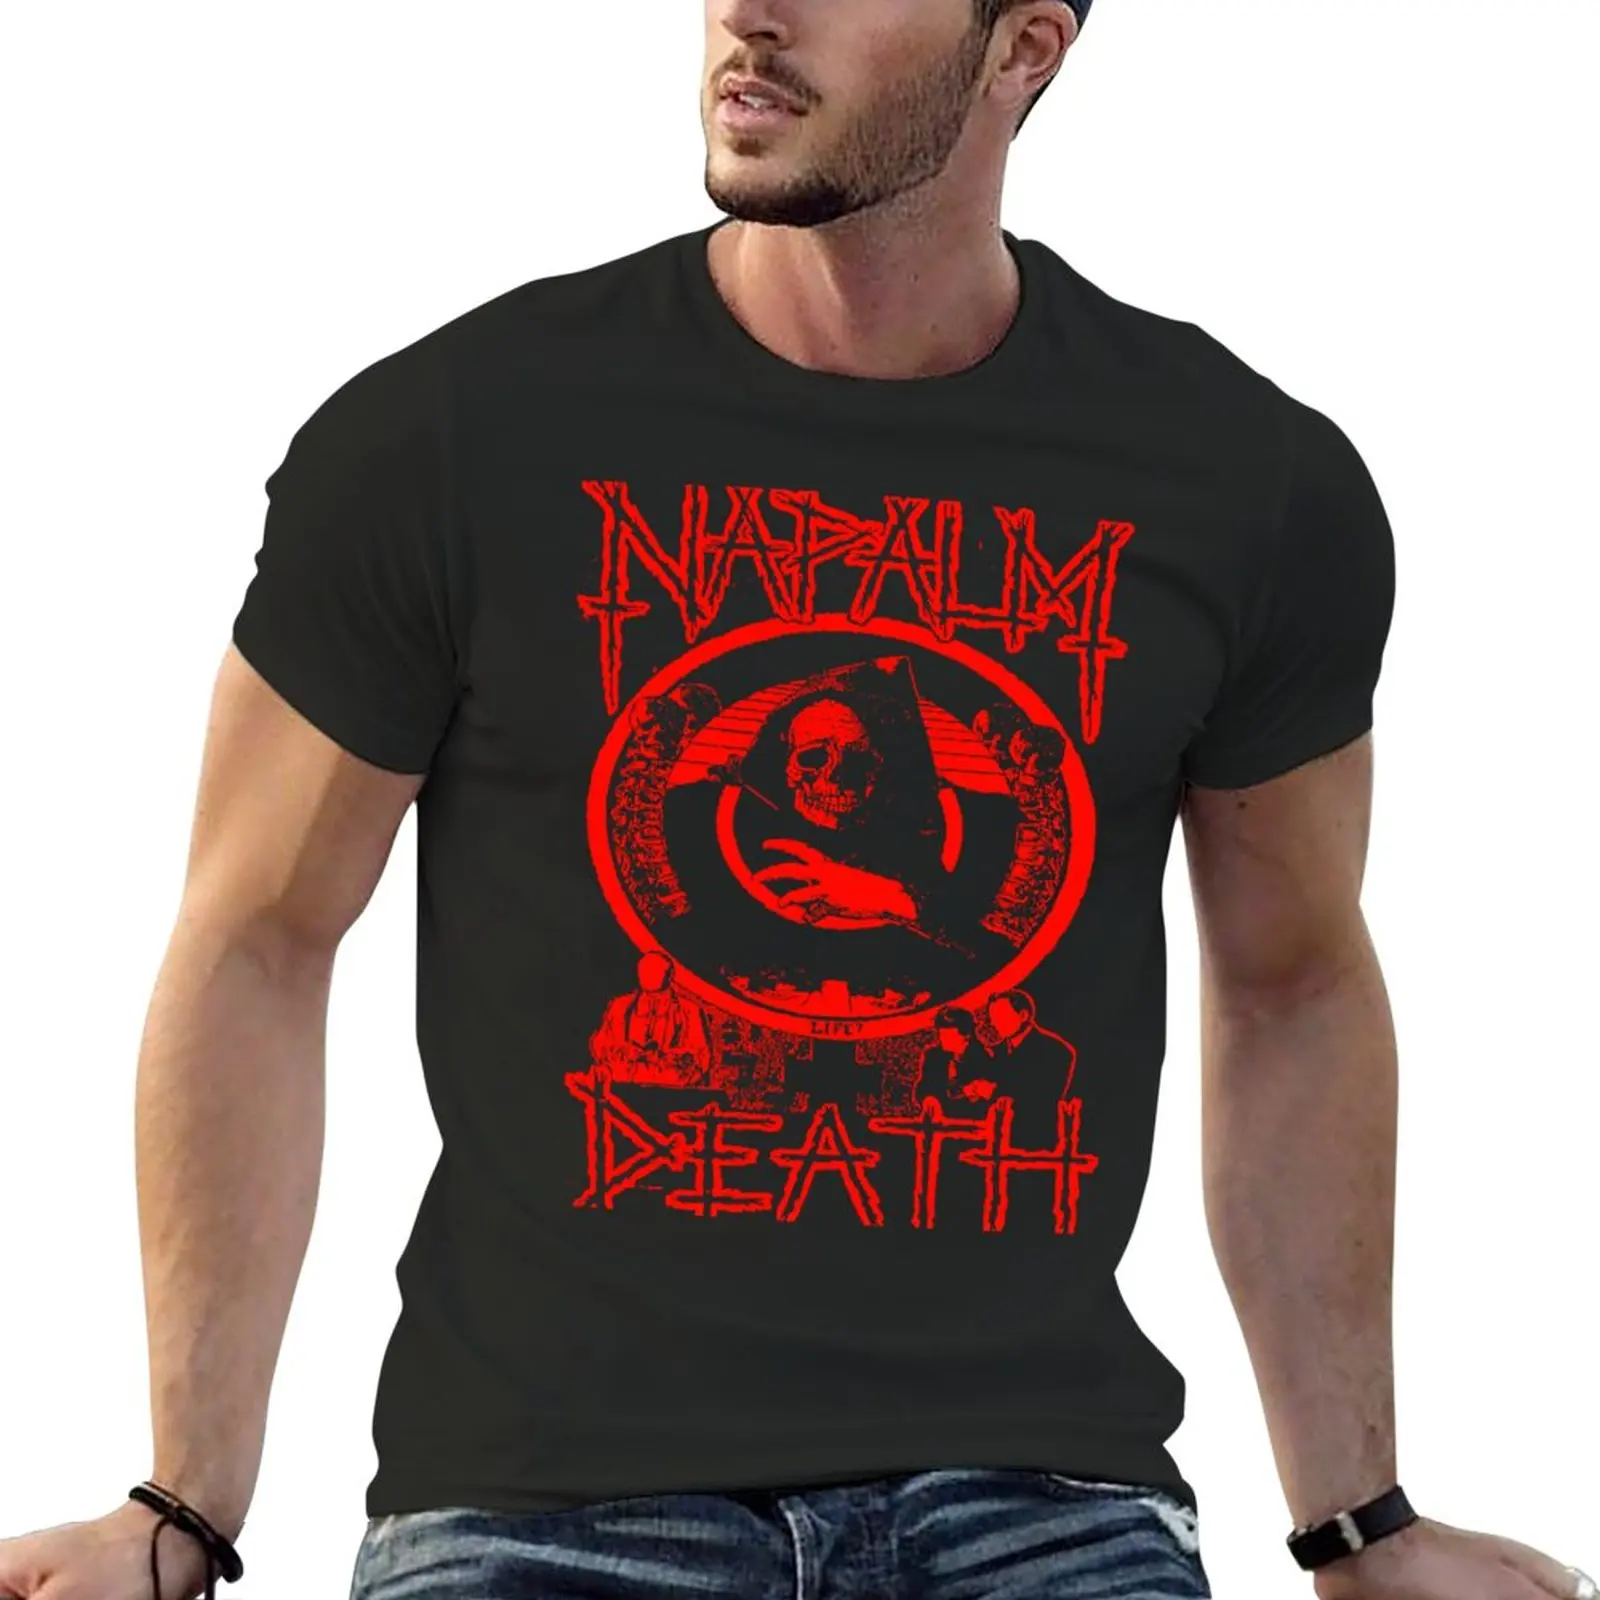 

New Napalm Death T-Shirt aesthetic clothes summer tops T-shirt short boys white t shirts oversized t shirt men